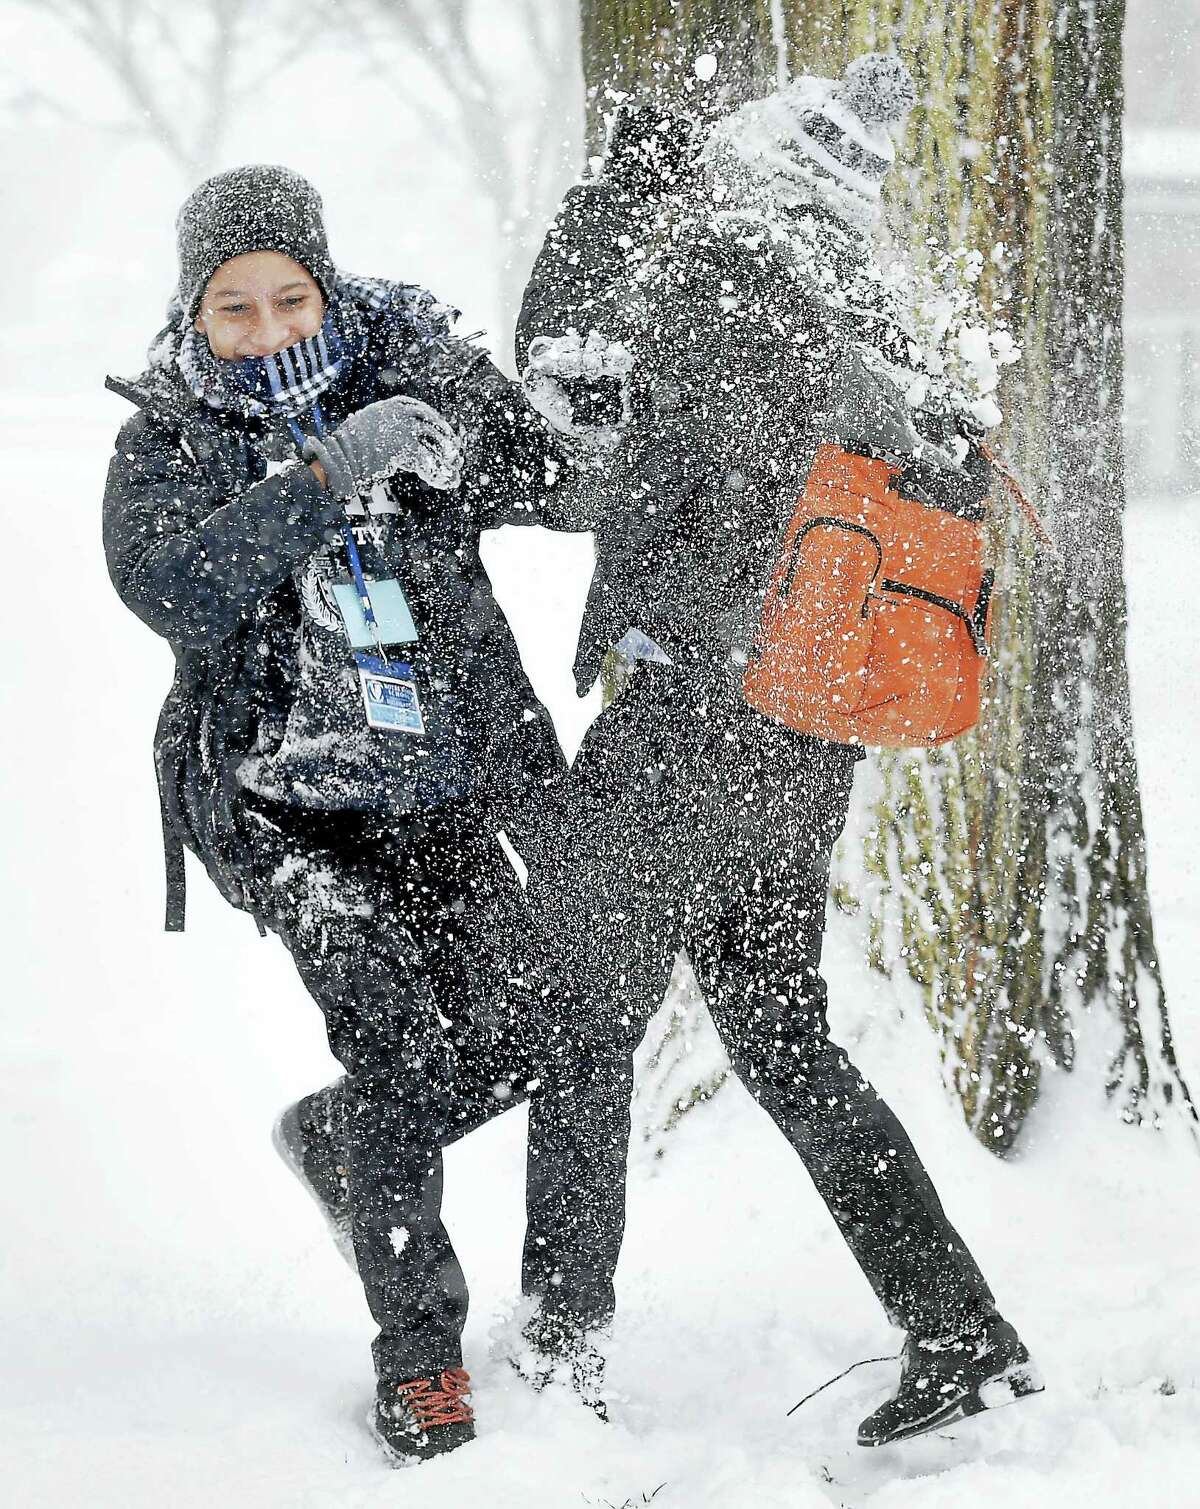 Victor Batista, left, and Joan Gomez have a snowball fight on Yale University’s Cross Campus in New Haven in January.